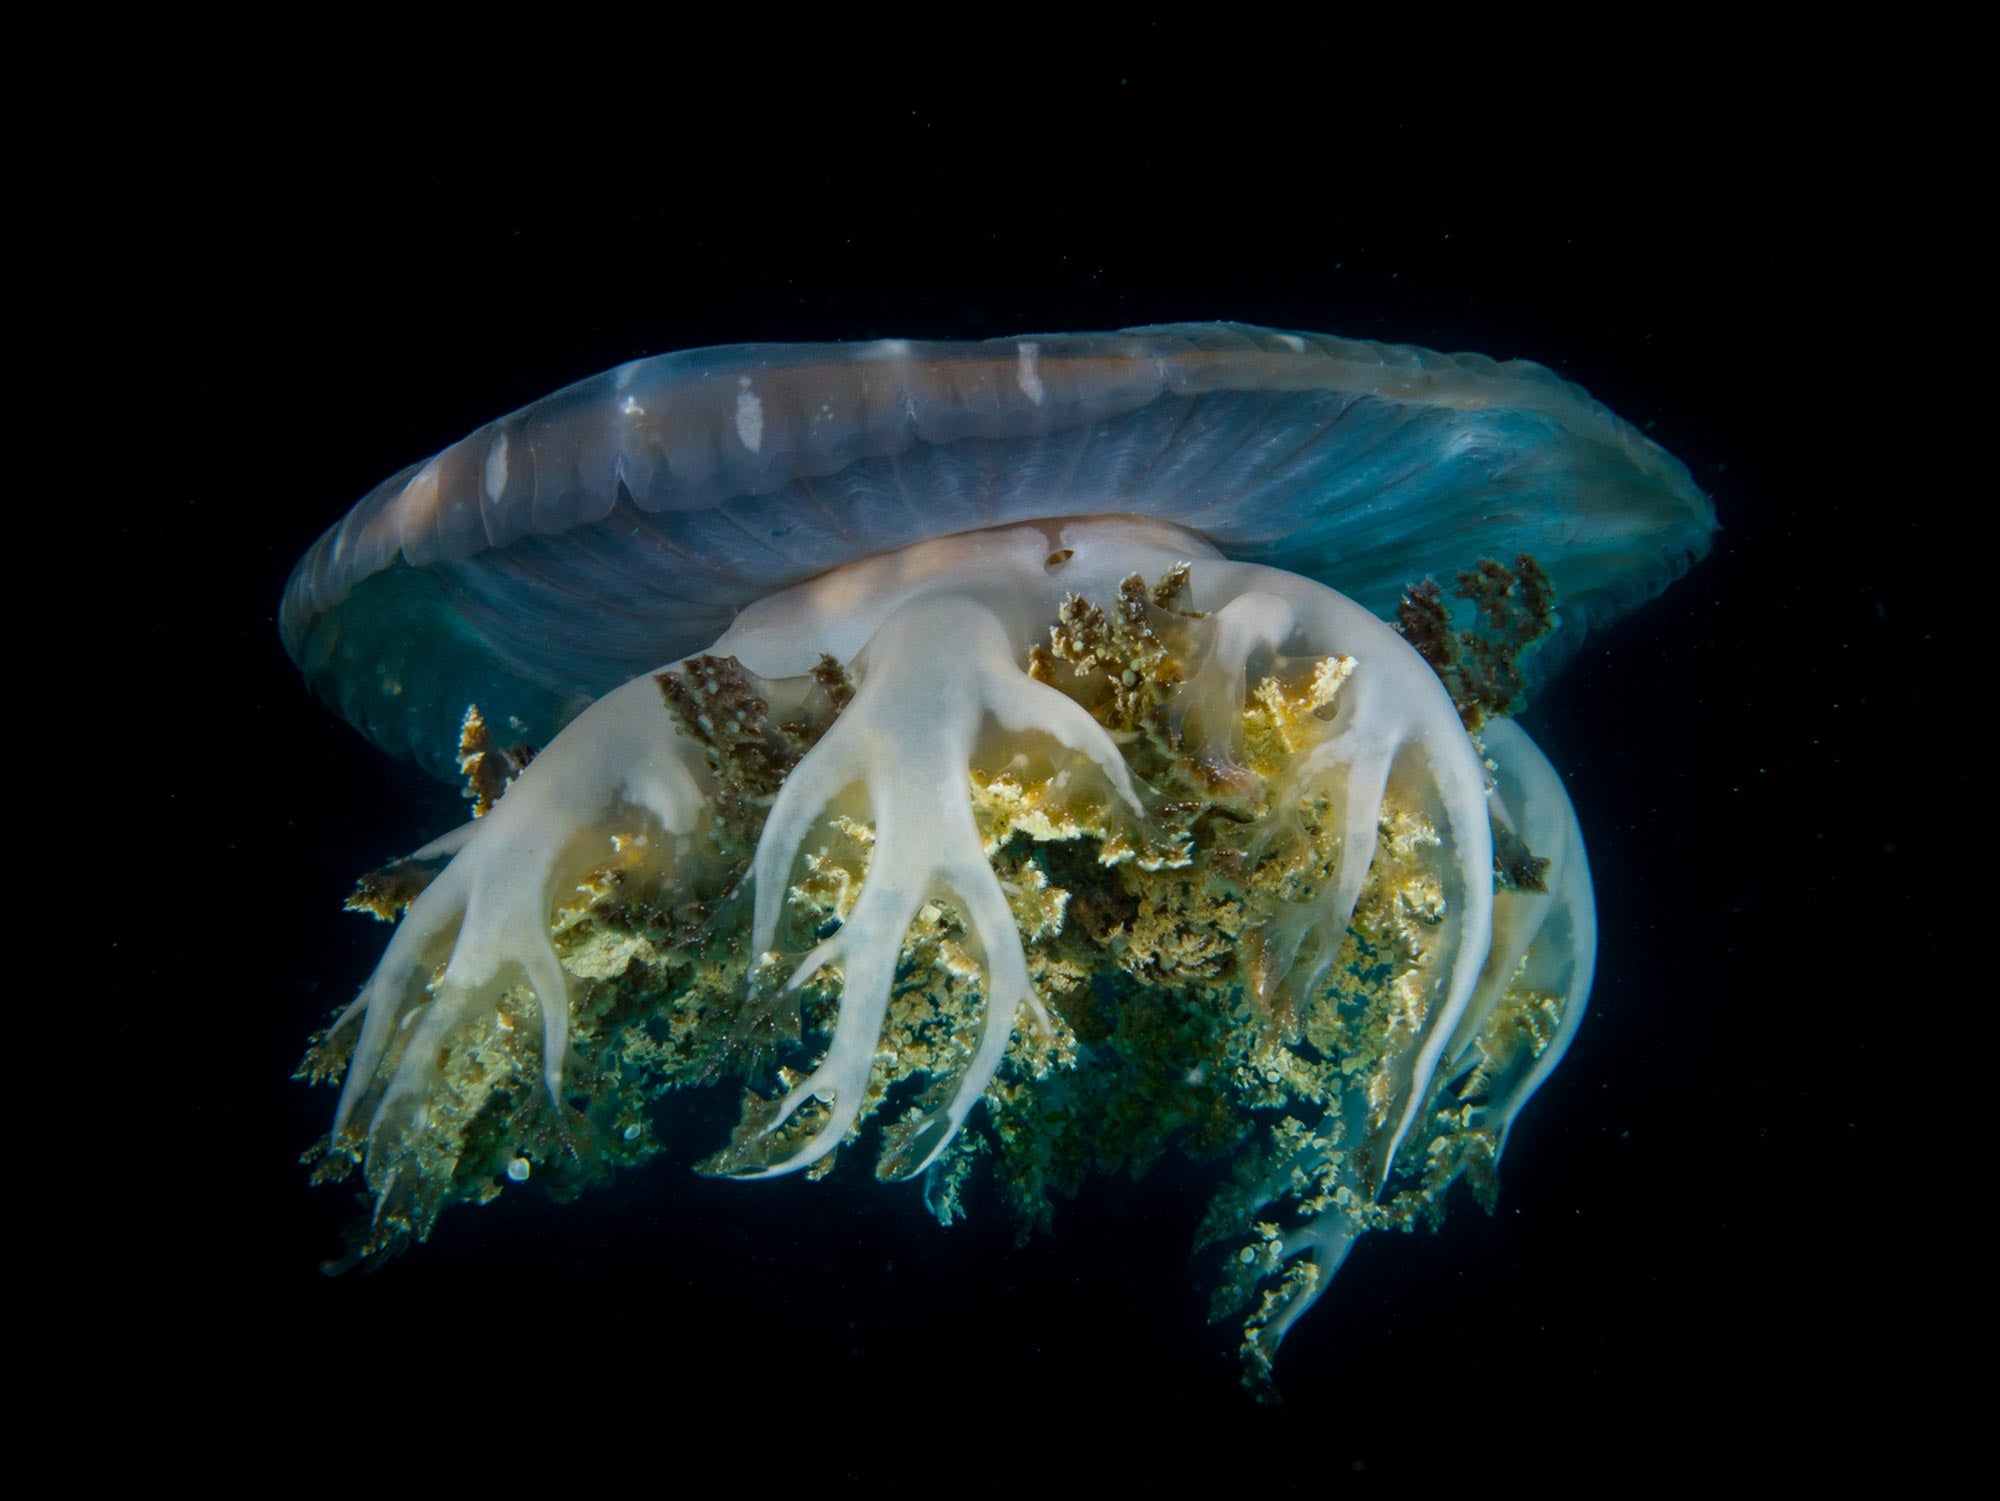 Jellyfish Underwater Photography Camera Settings and Technique